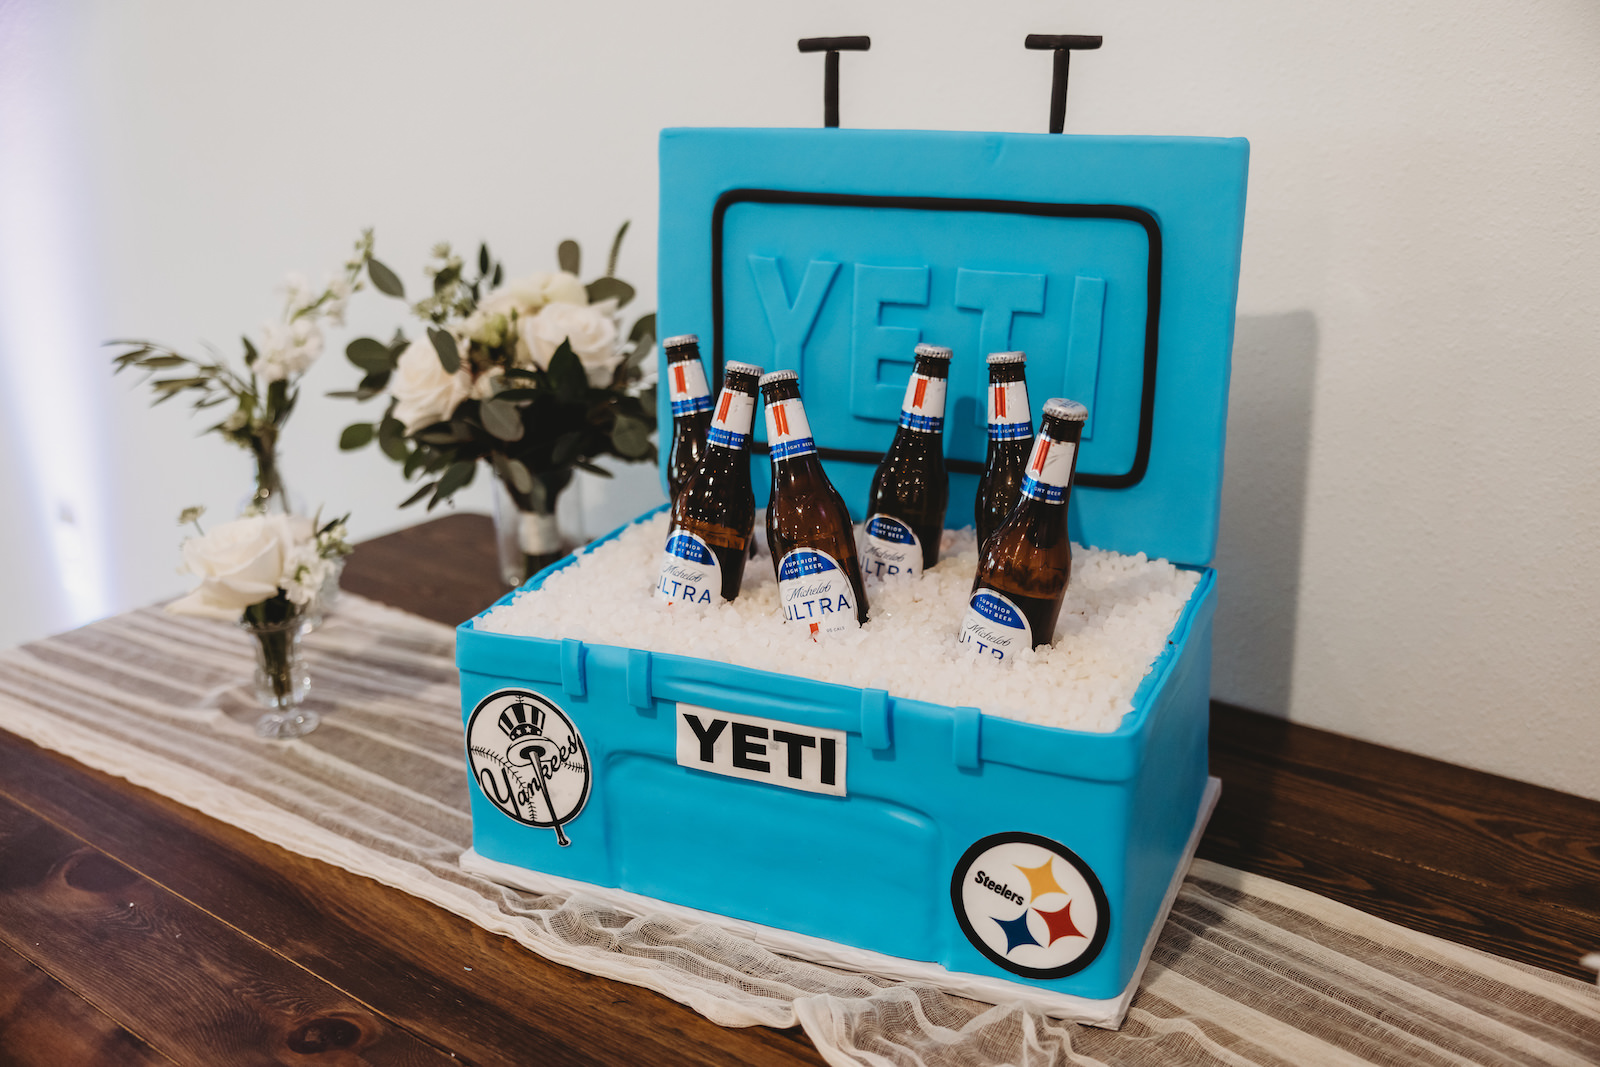 Grooms Wedding Cake, Blue Yeti Cooler with Yankees and Steelers Decor and Beer Bottles